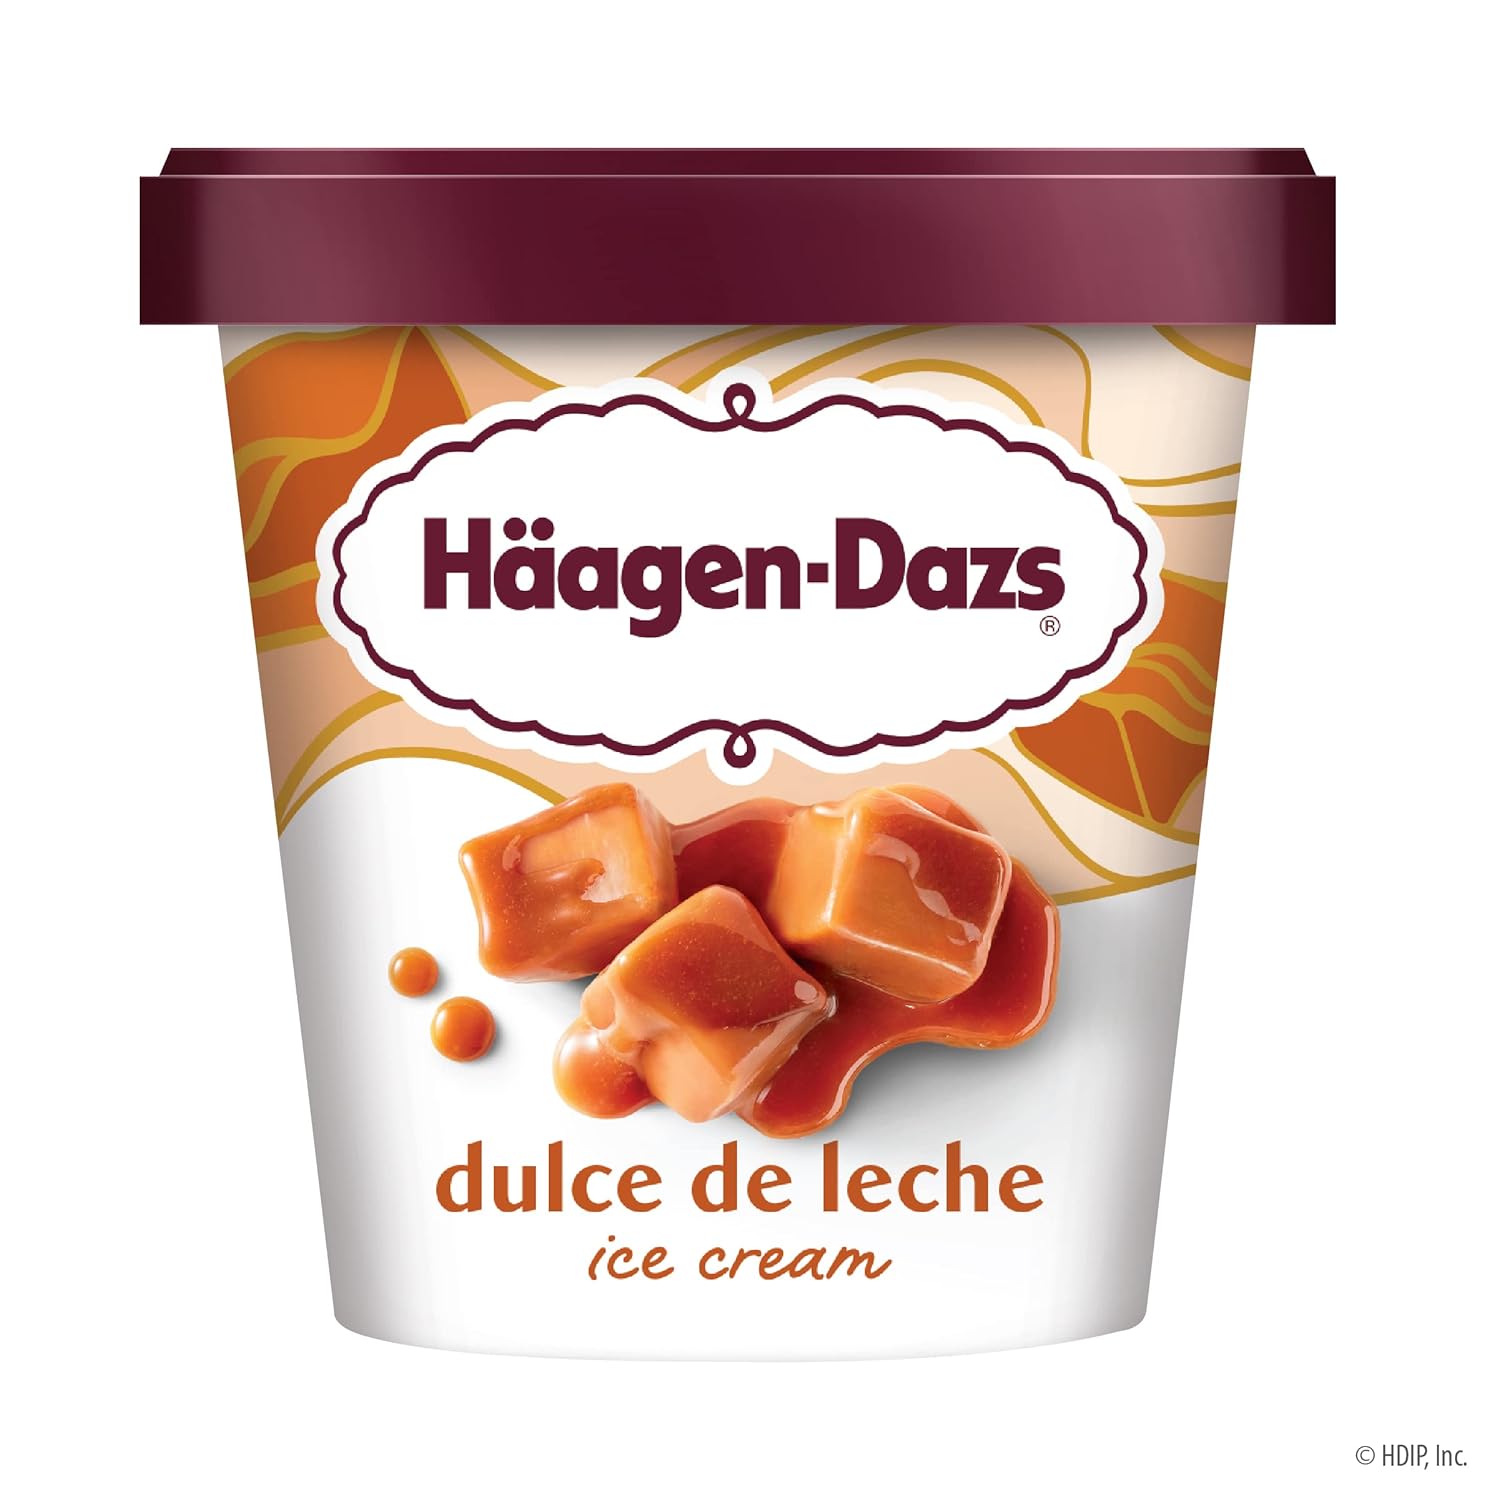 IF YOU ARE A FAN OF DULCE DE LECHE BUY IT!!! The flavor is so yummy and makes you want to eat a whole tub! Its that good!!